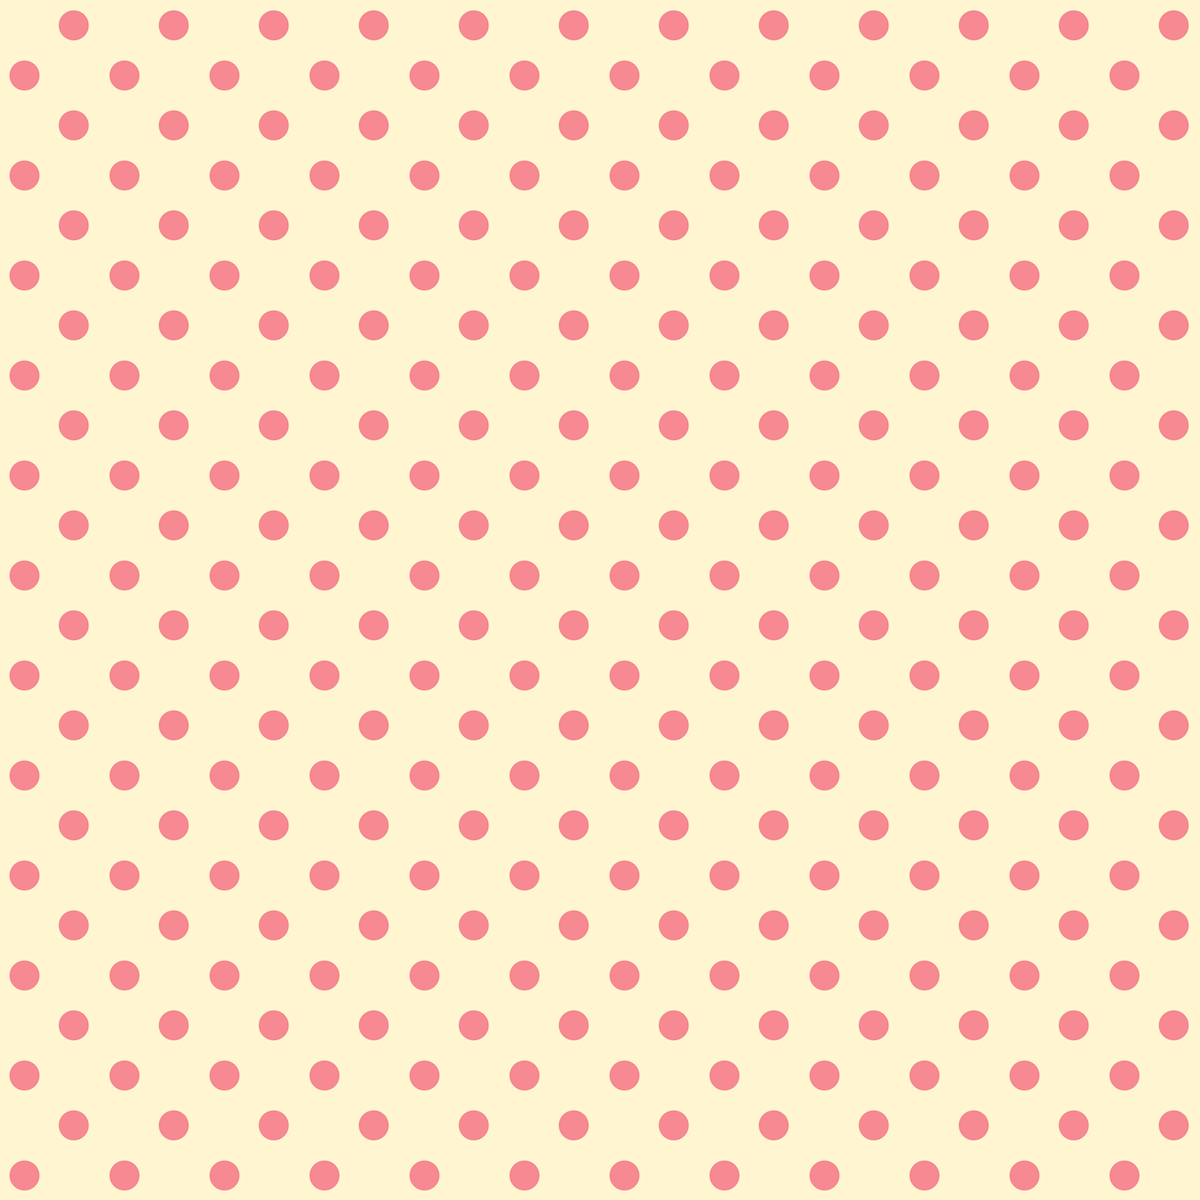 free-polka-dot-download-free-polka-dot-png-images-free-cliparts-on-clipart-library